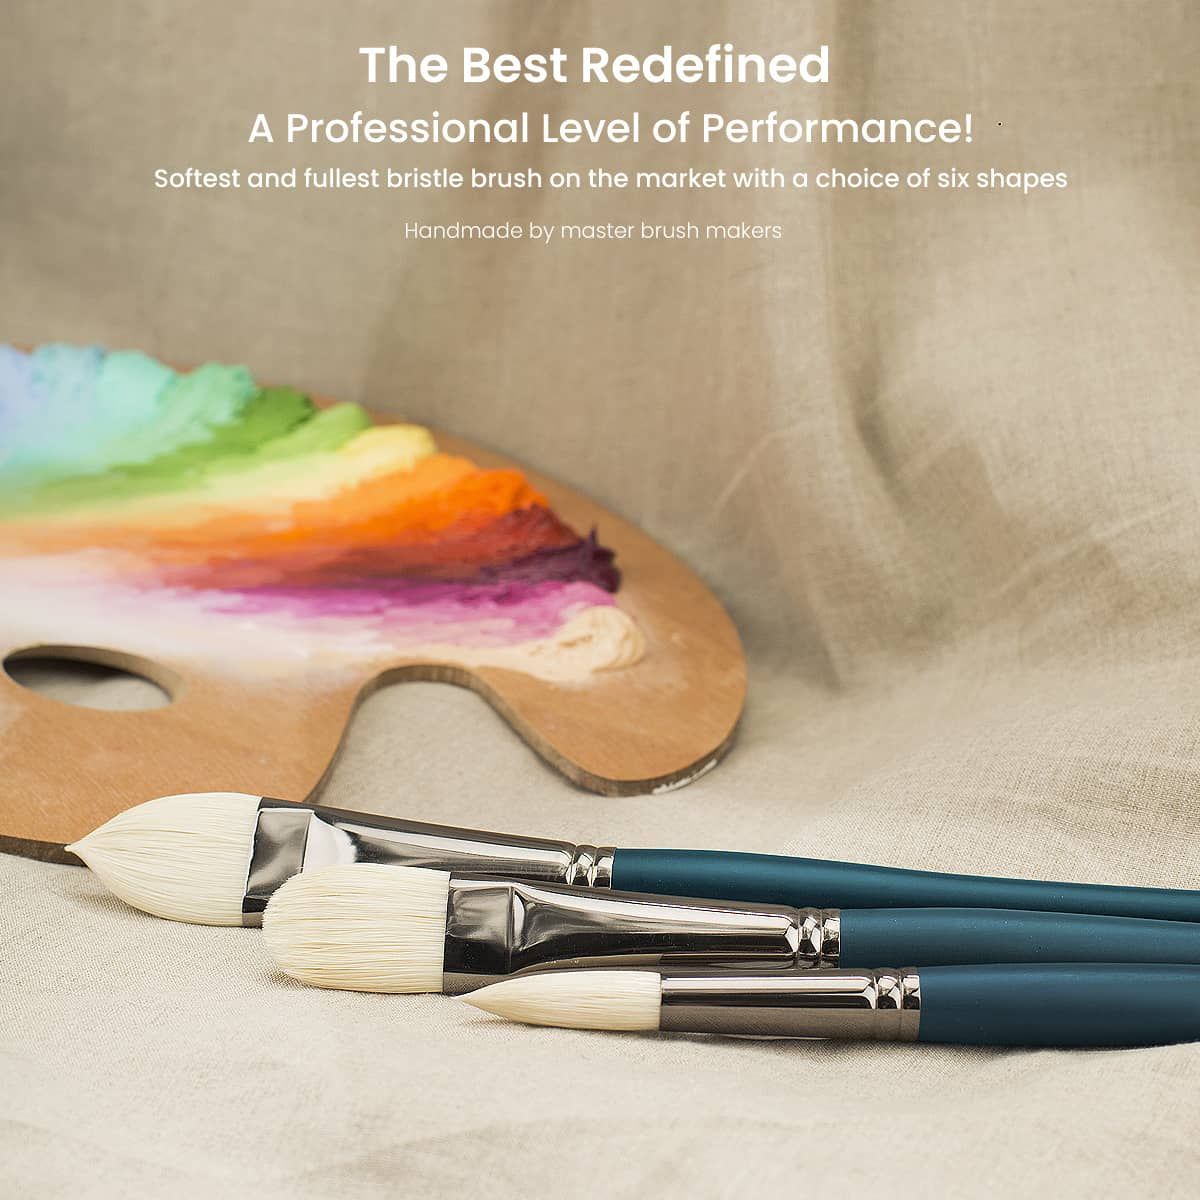 The Best Redefined! Softest And Fullest Bristle Brush On The Market